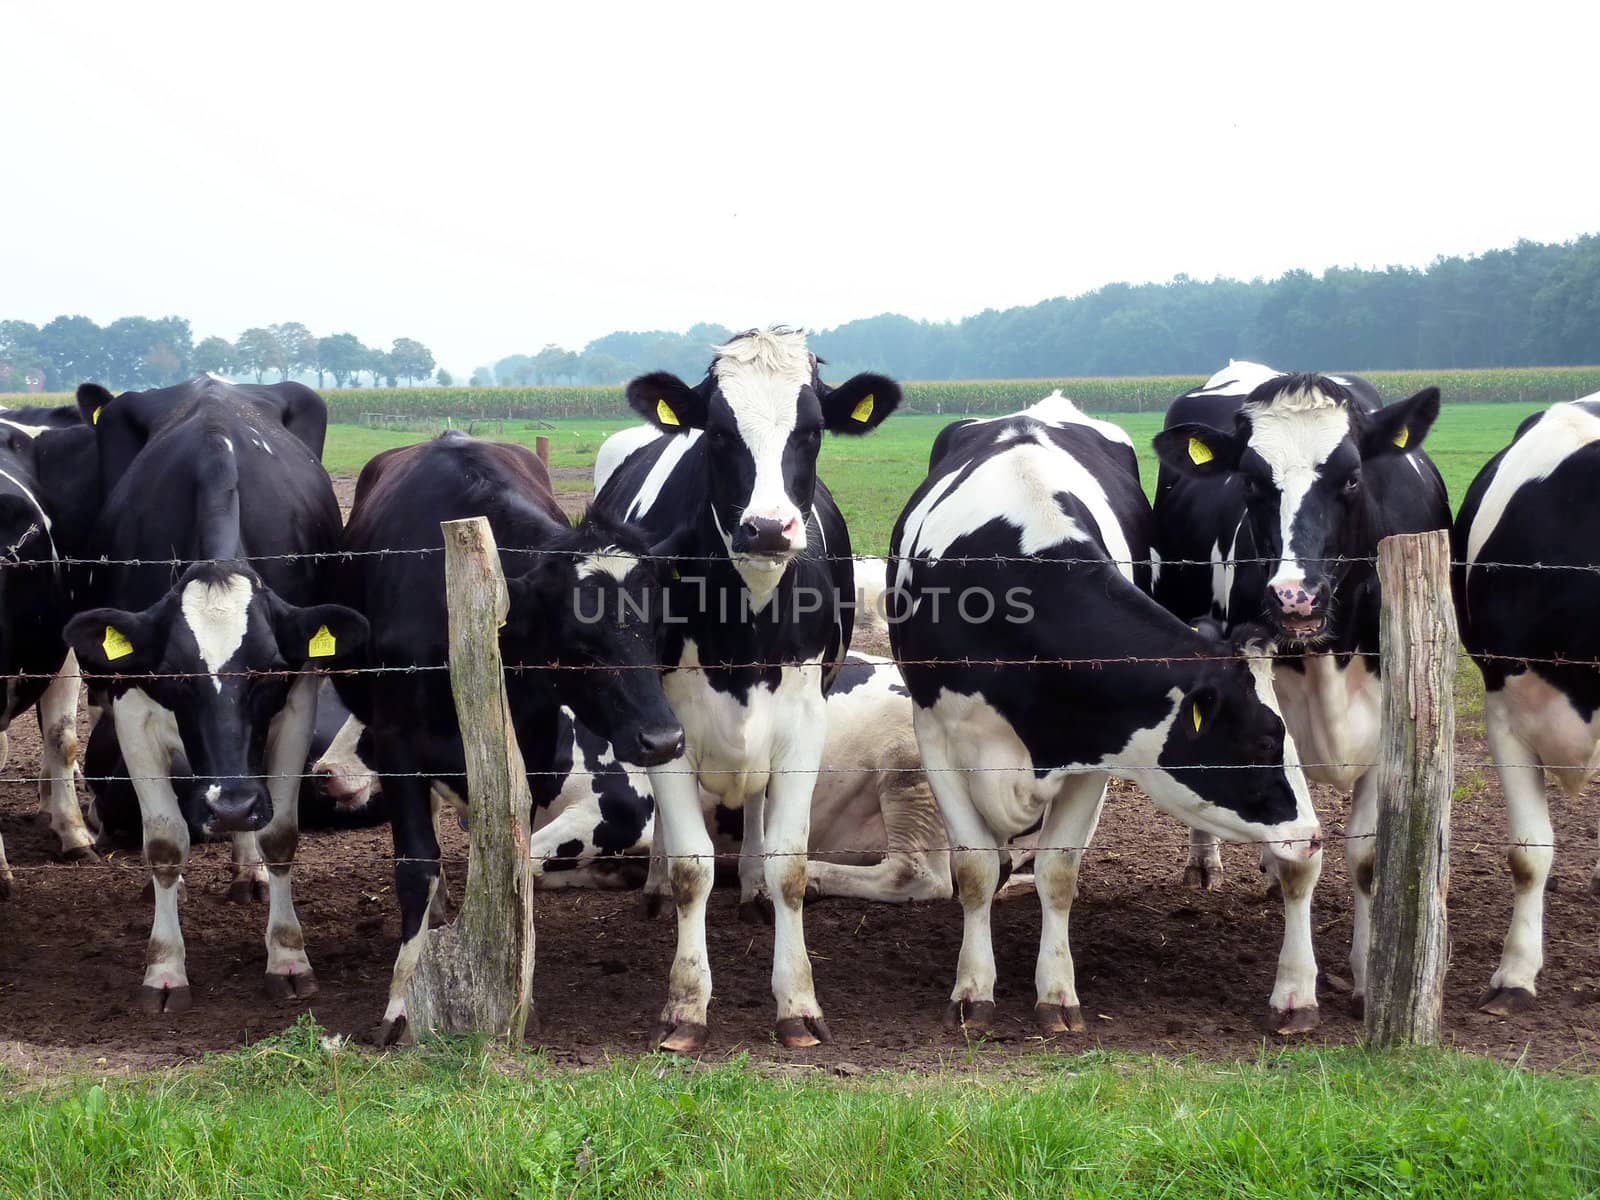 Herd of curious Friesian cattle behind barbed wire fence